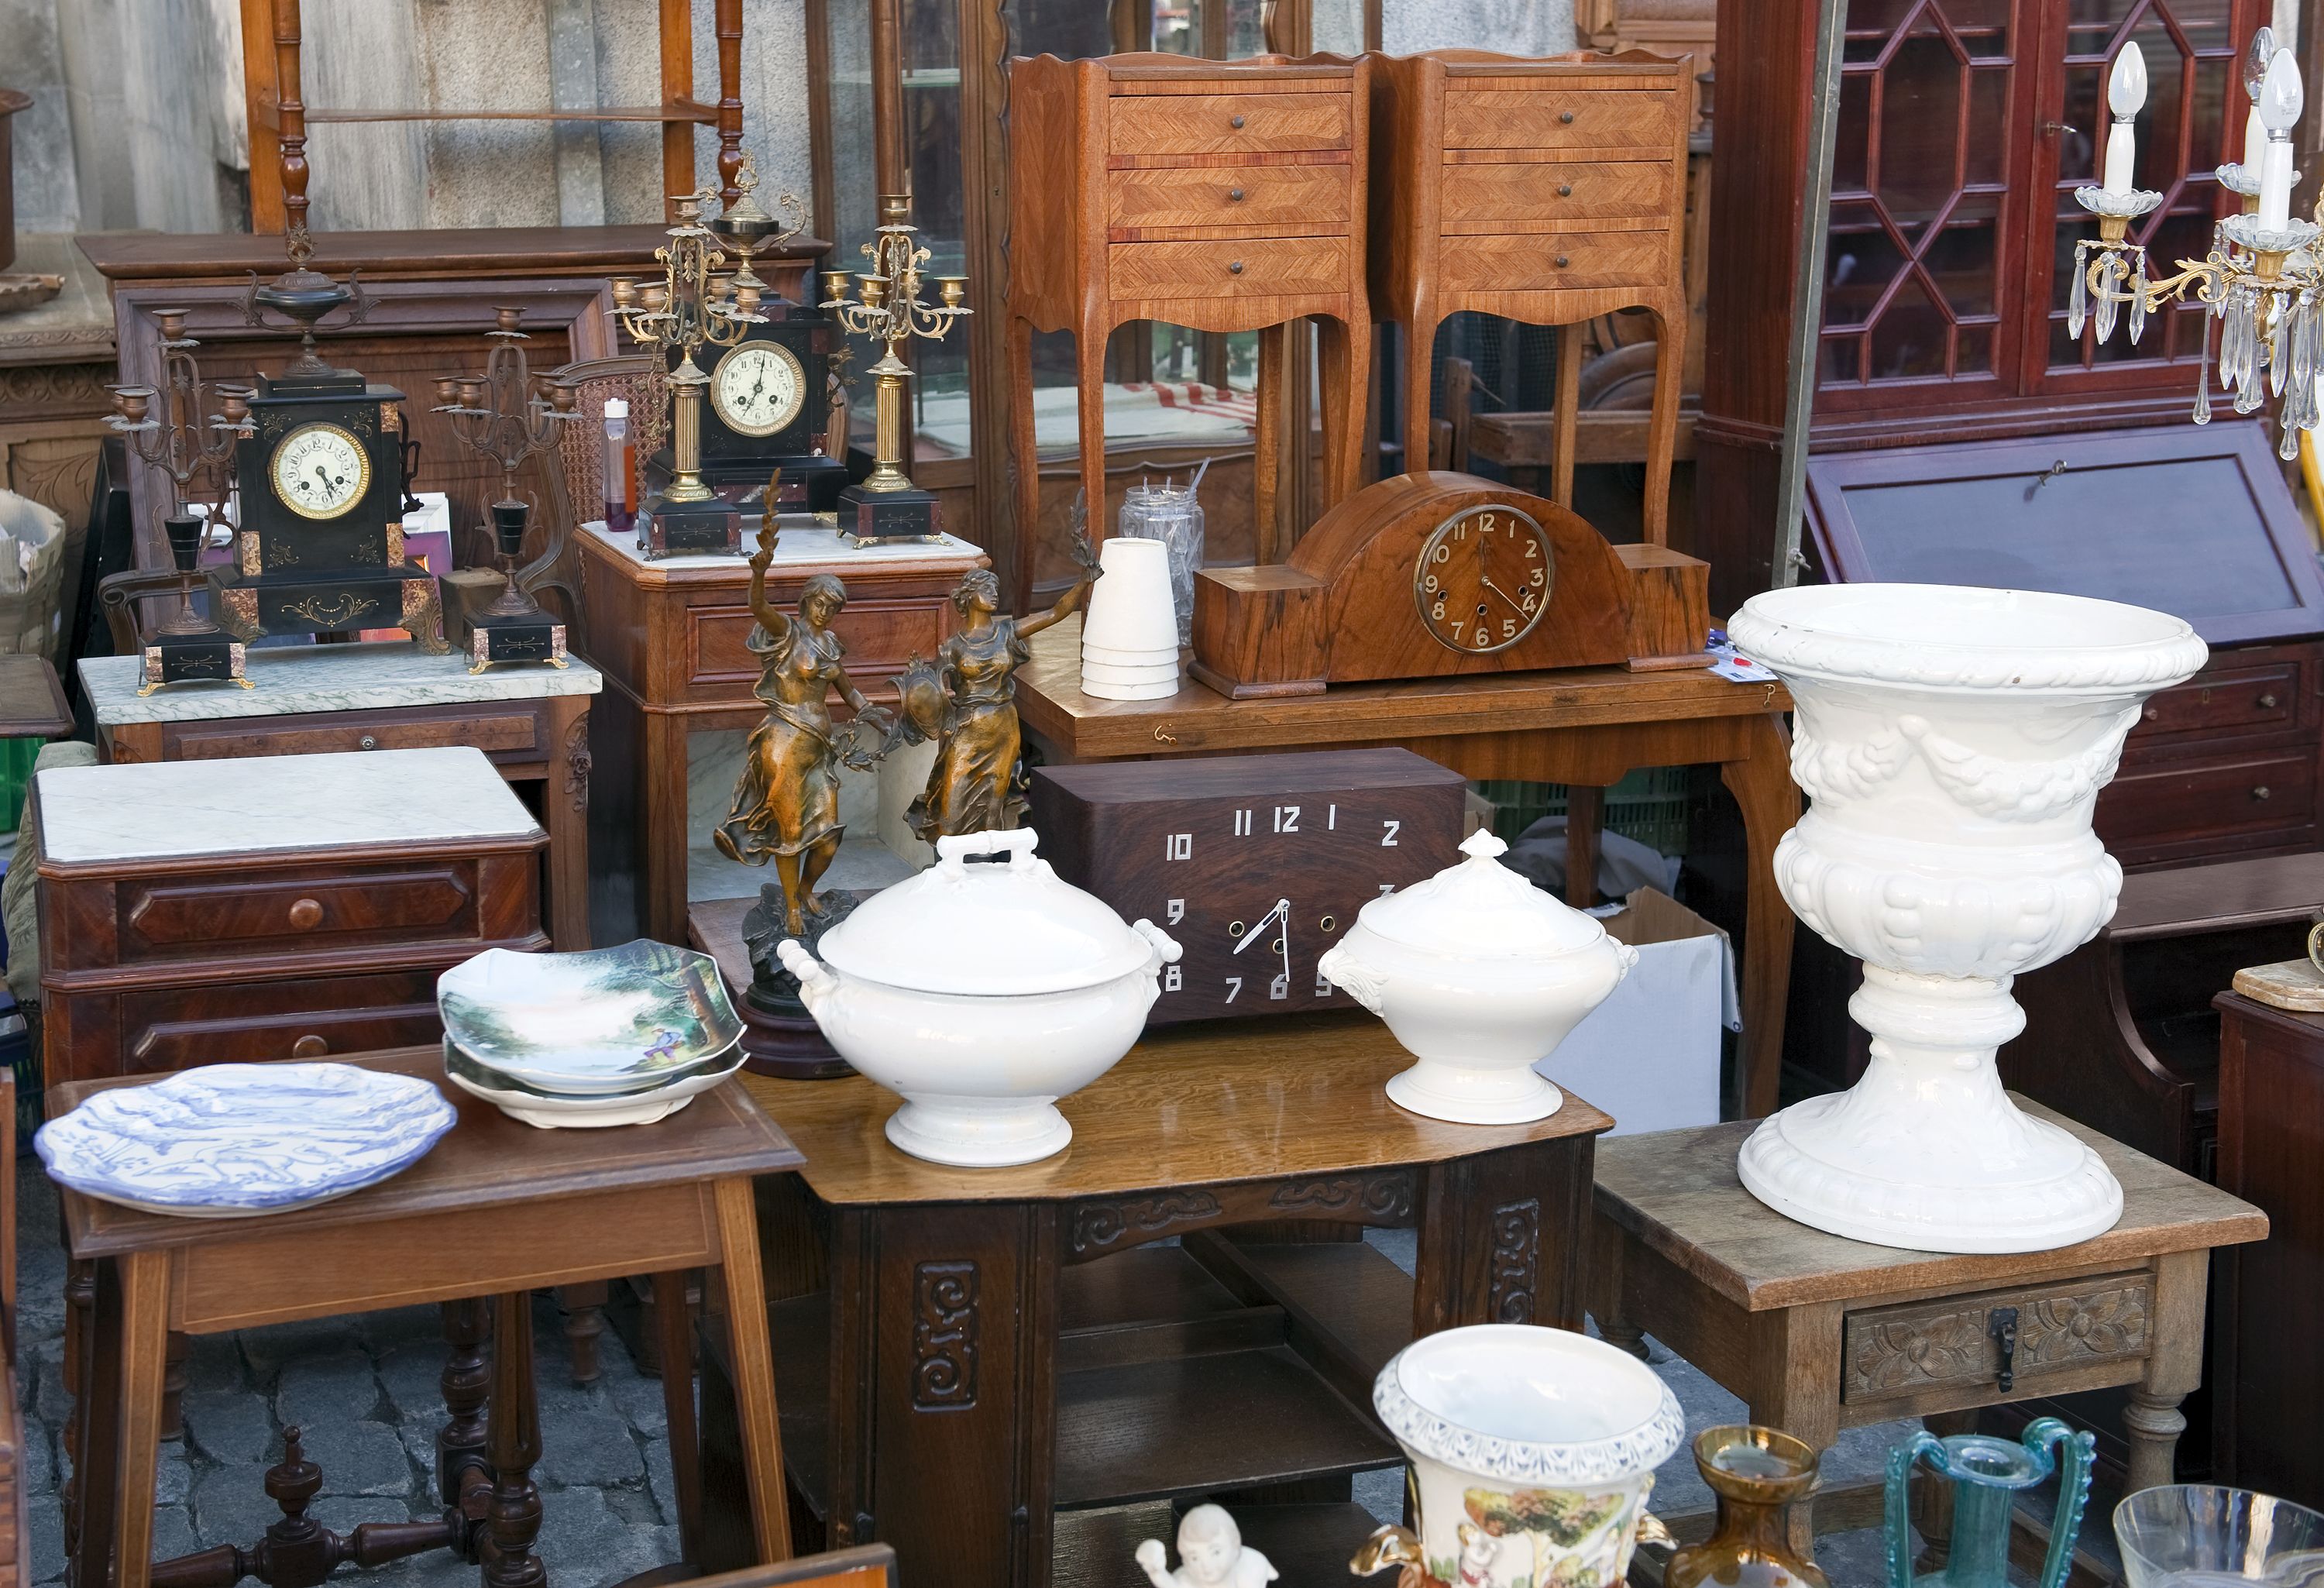 55 Antiques Worth a Lot of Money - Valuable Antiques and Collectibles